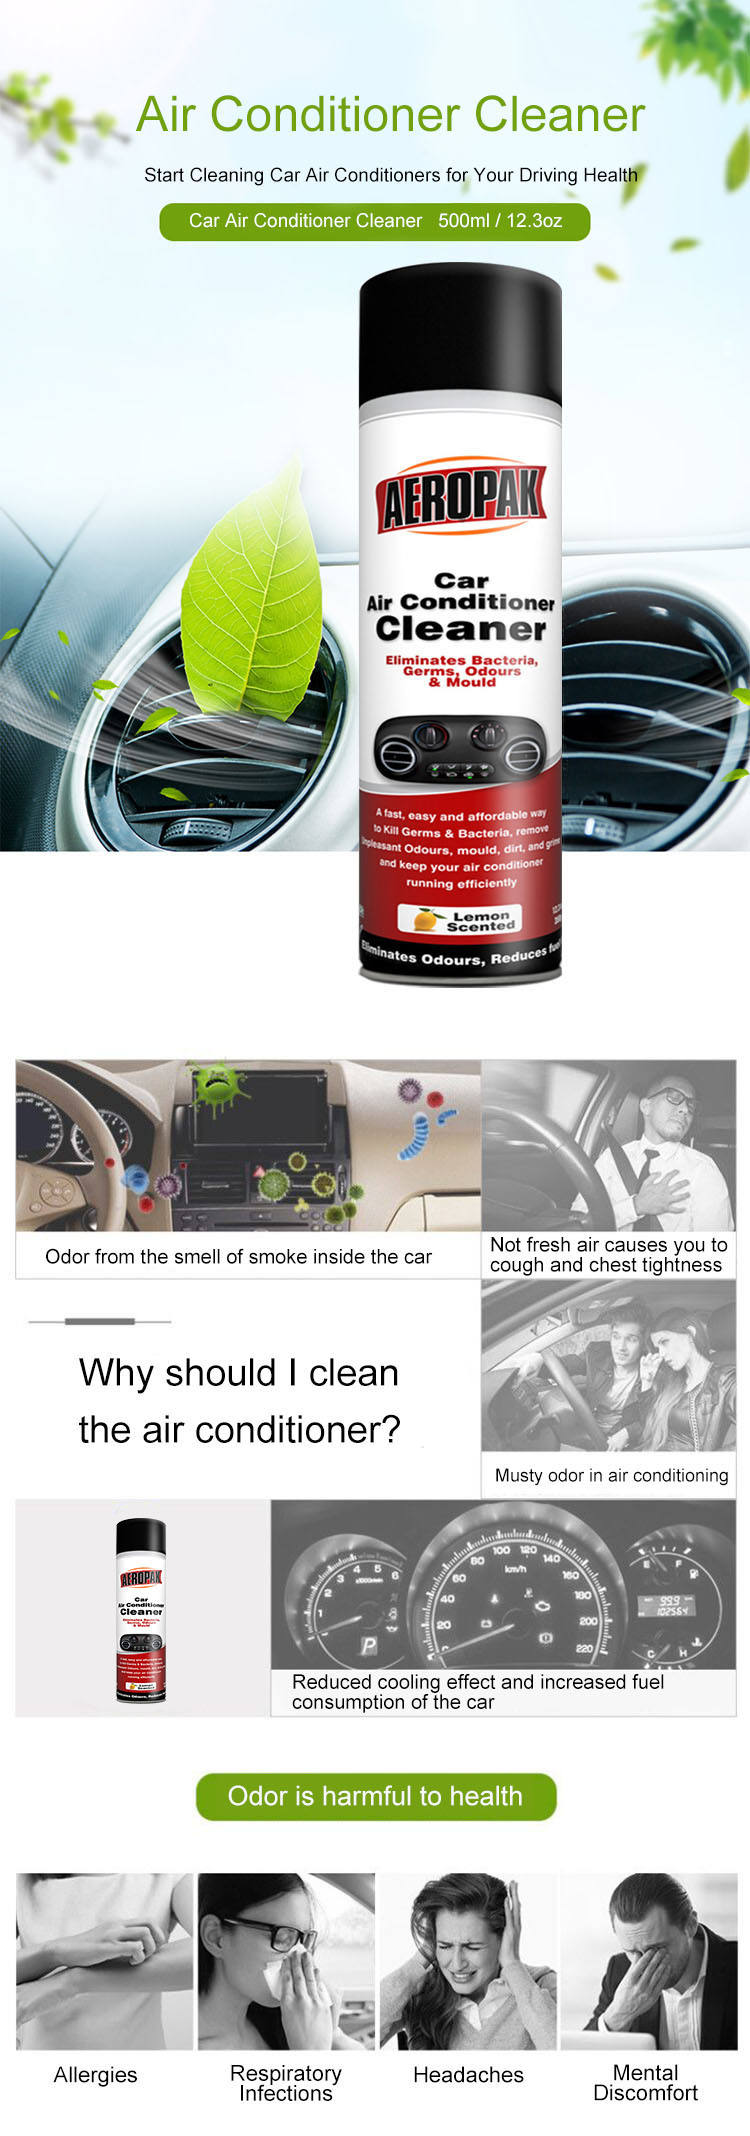 Foamy Cleaning Air Conditioner Cleaner Spray for Car Air Conditioner and Home AC